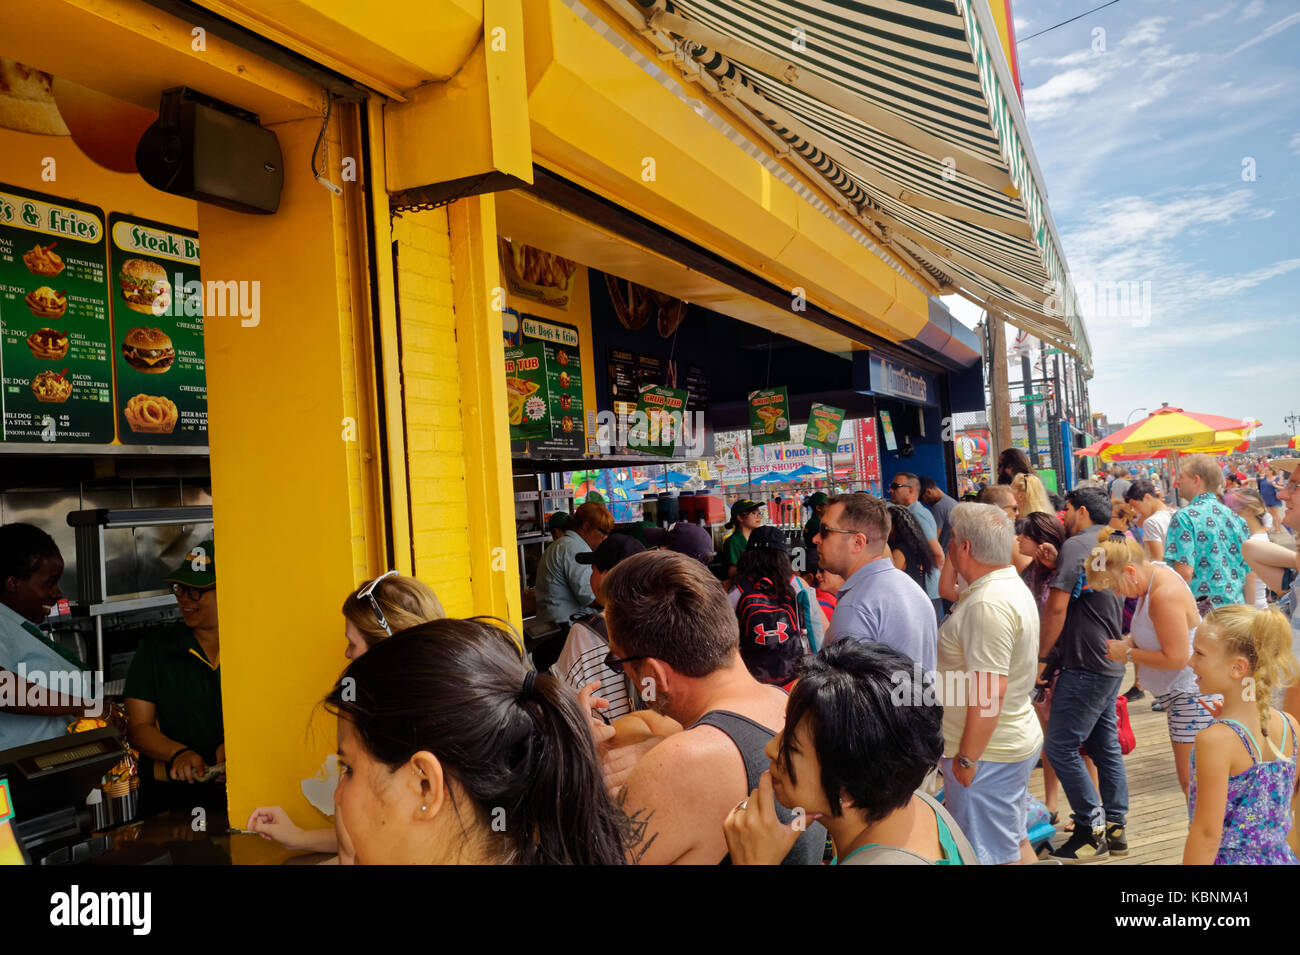 Line of visitors and tourists at Nathan's Famous restaurant on the Coney Island boardwalk. Stock Photo